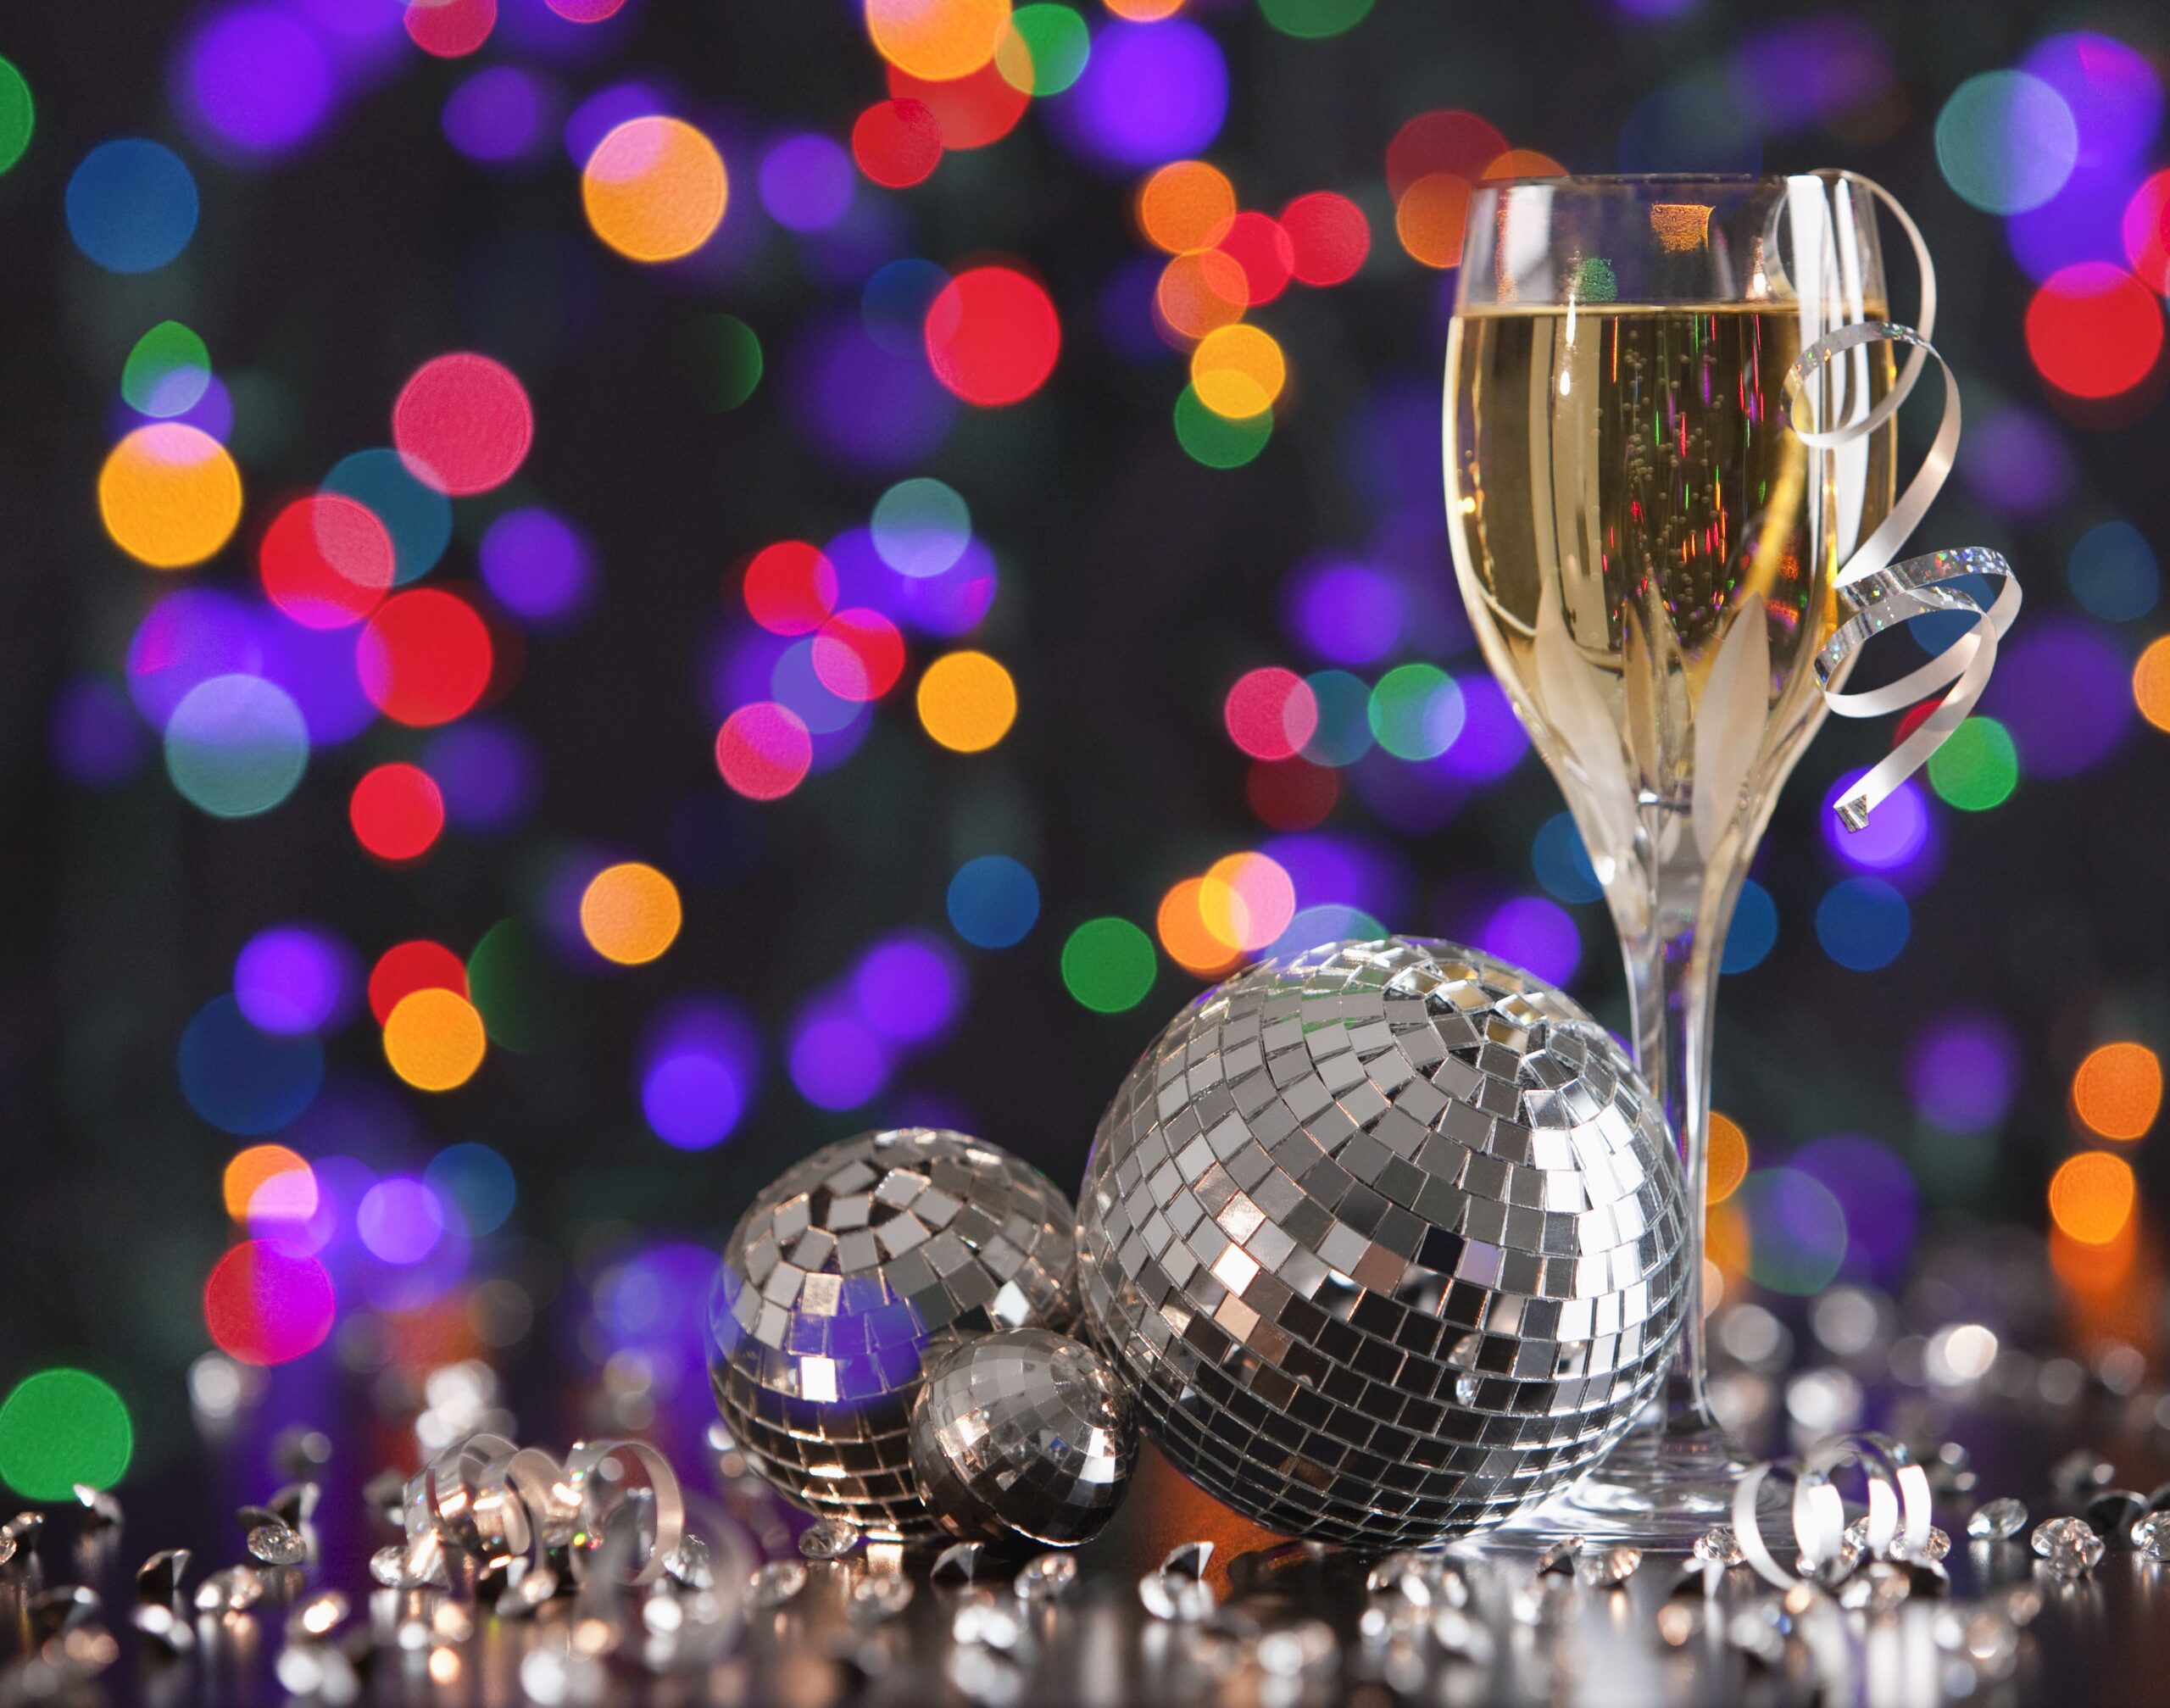 Celebrating New Year’s Eve at Home: Making It Memorable, Meaningful, and Budget-Friendly